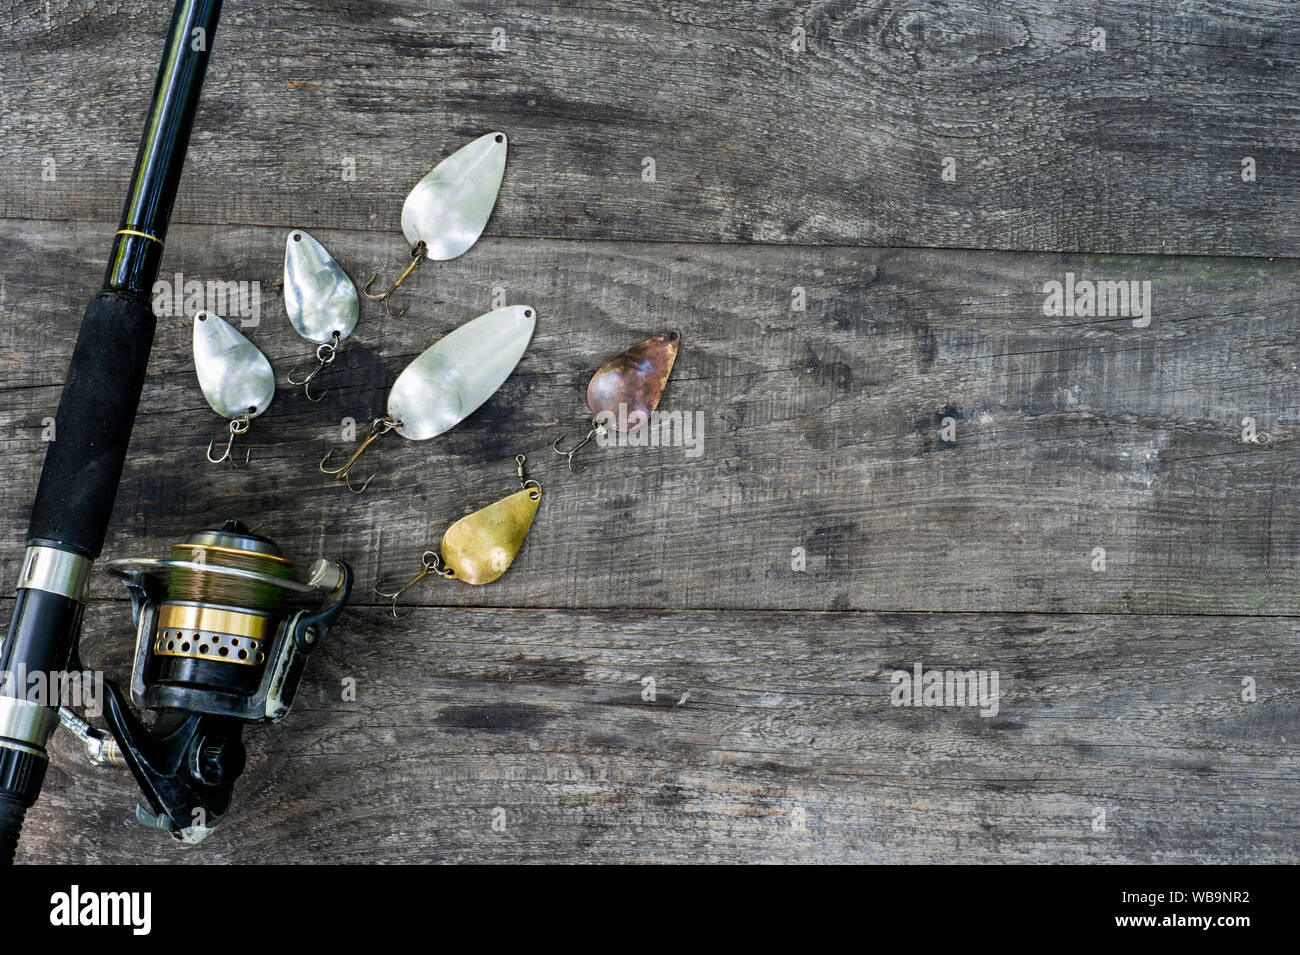 https://c8.alamy.com/comp/WB9NR2/spoon-shaped-spinners-in-various-colors-with-spinning-rod-with-coil-on-vintage-wooden-background-the-concept-of-choosing-bait-for-different-fishing-c-WB9NR2.jpg